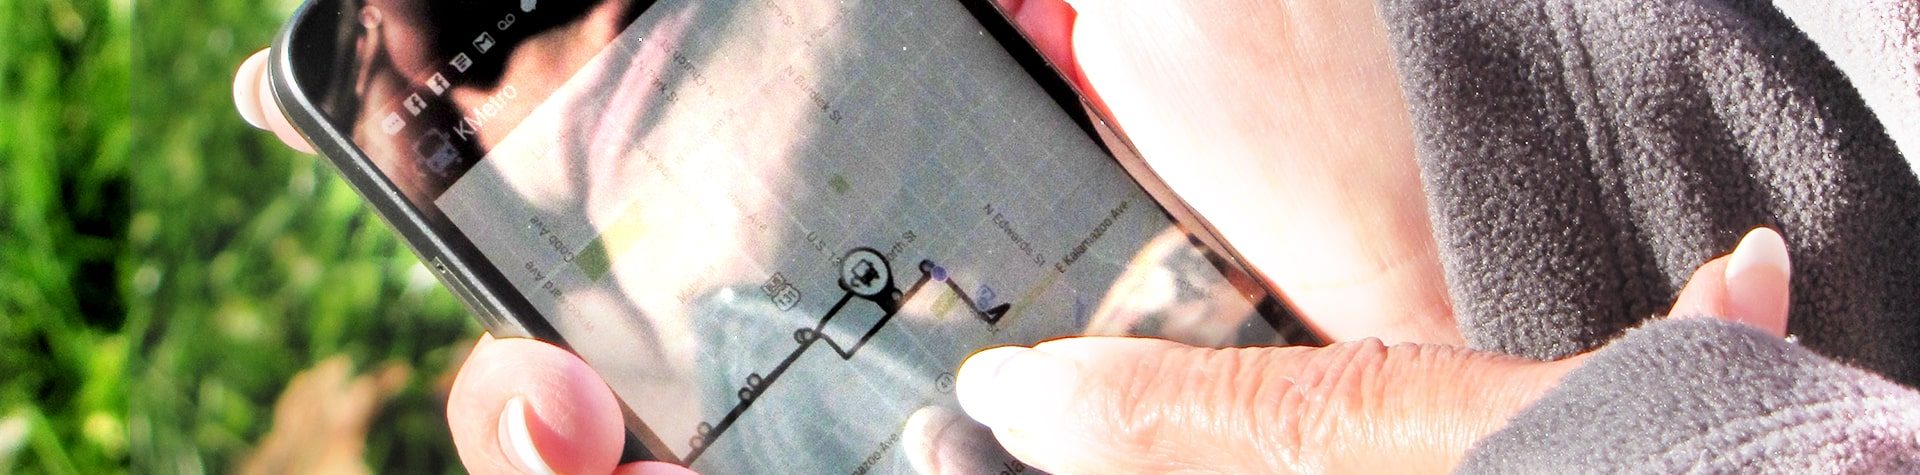 An image of a passenger using the Kalamazoo Metro application on their phone.